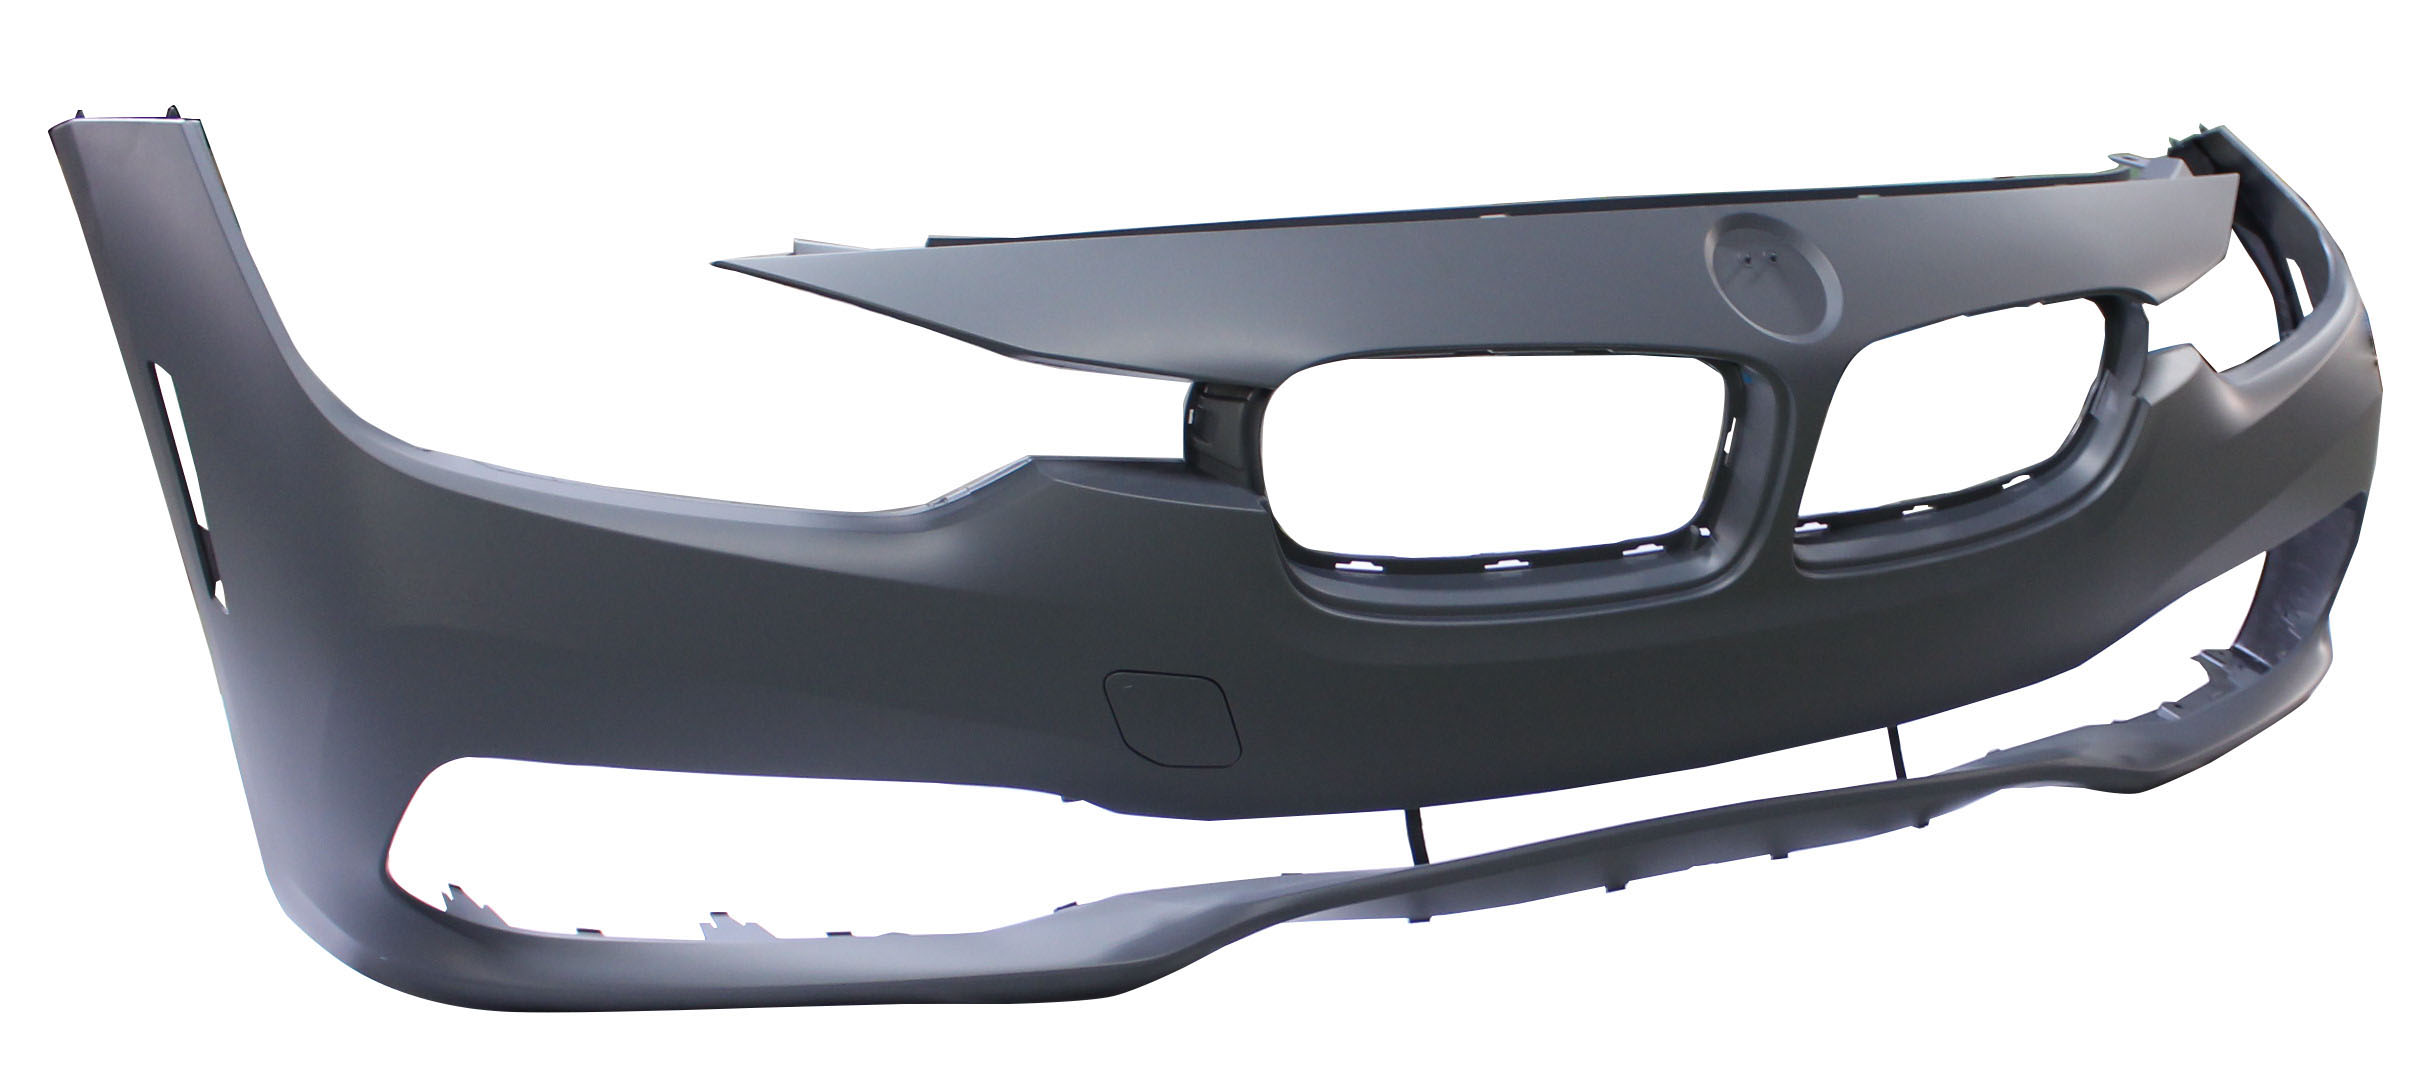 Aftermarket BUMPER COVERS for BMW - 328I, 328i,16-16,Front bumper cover